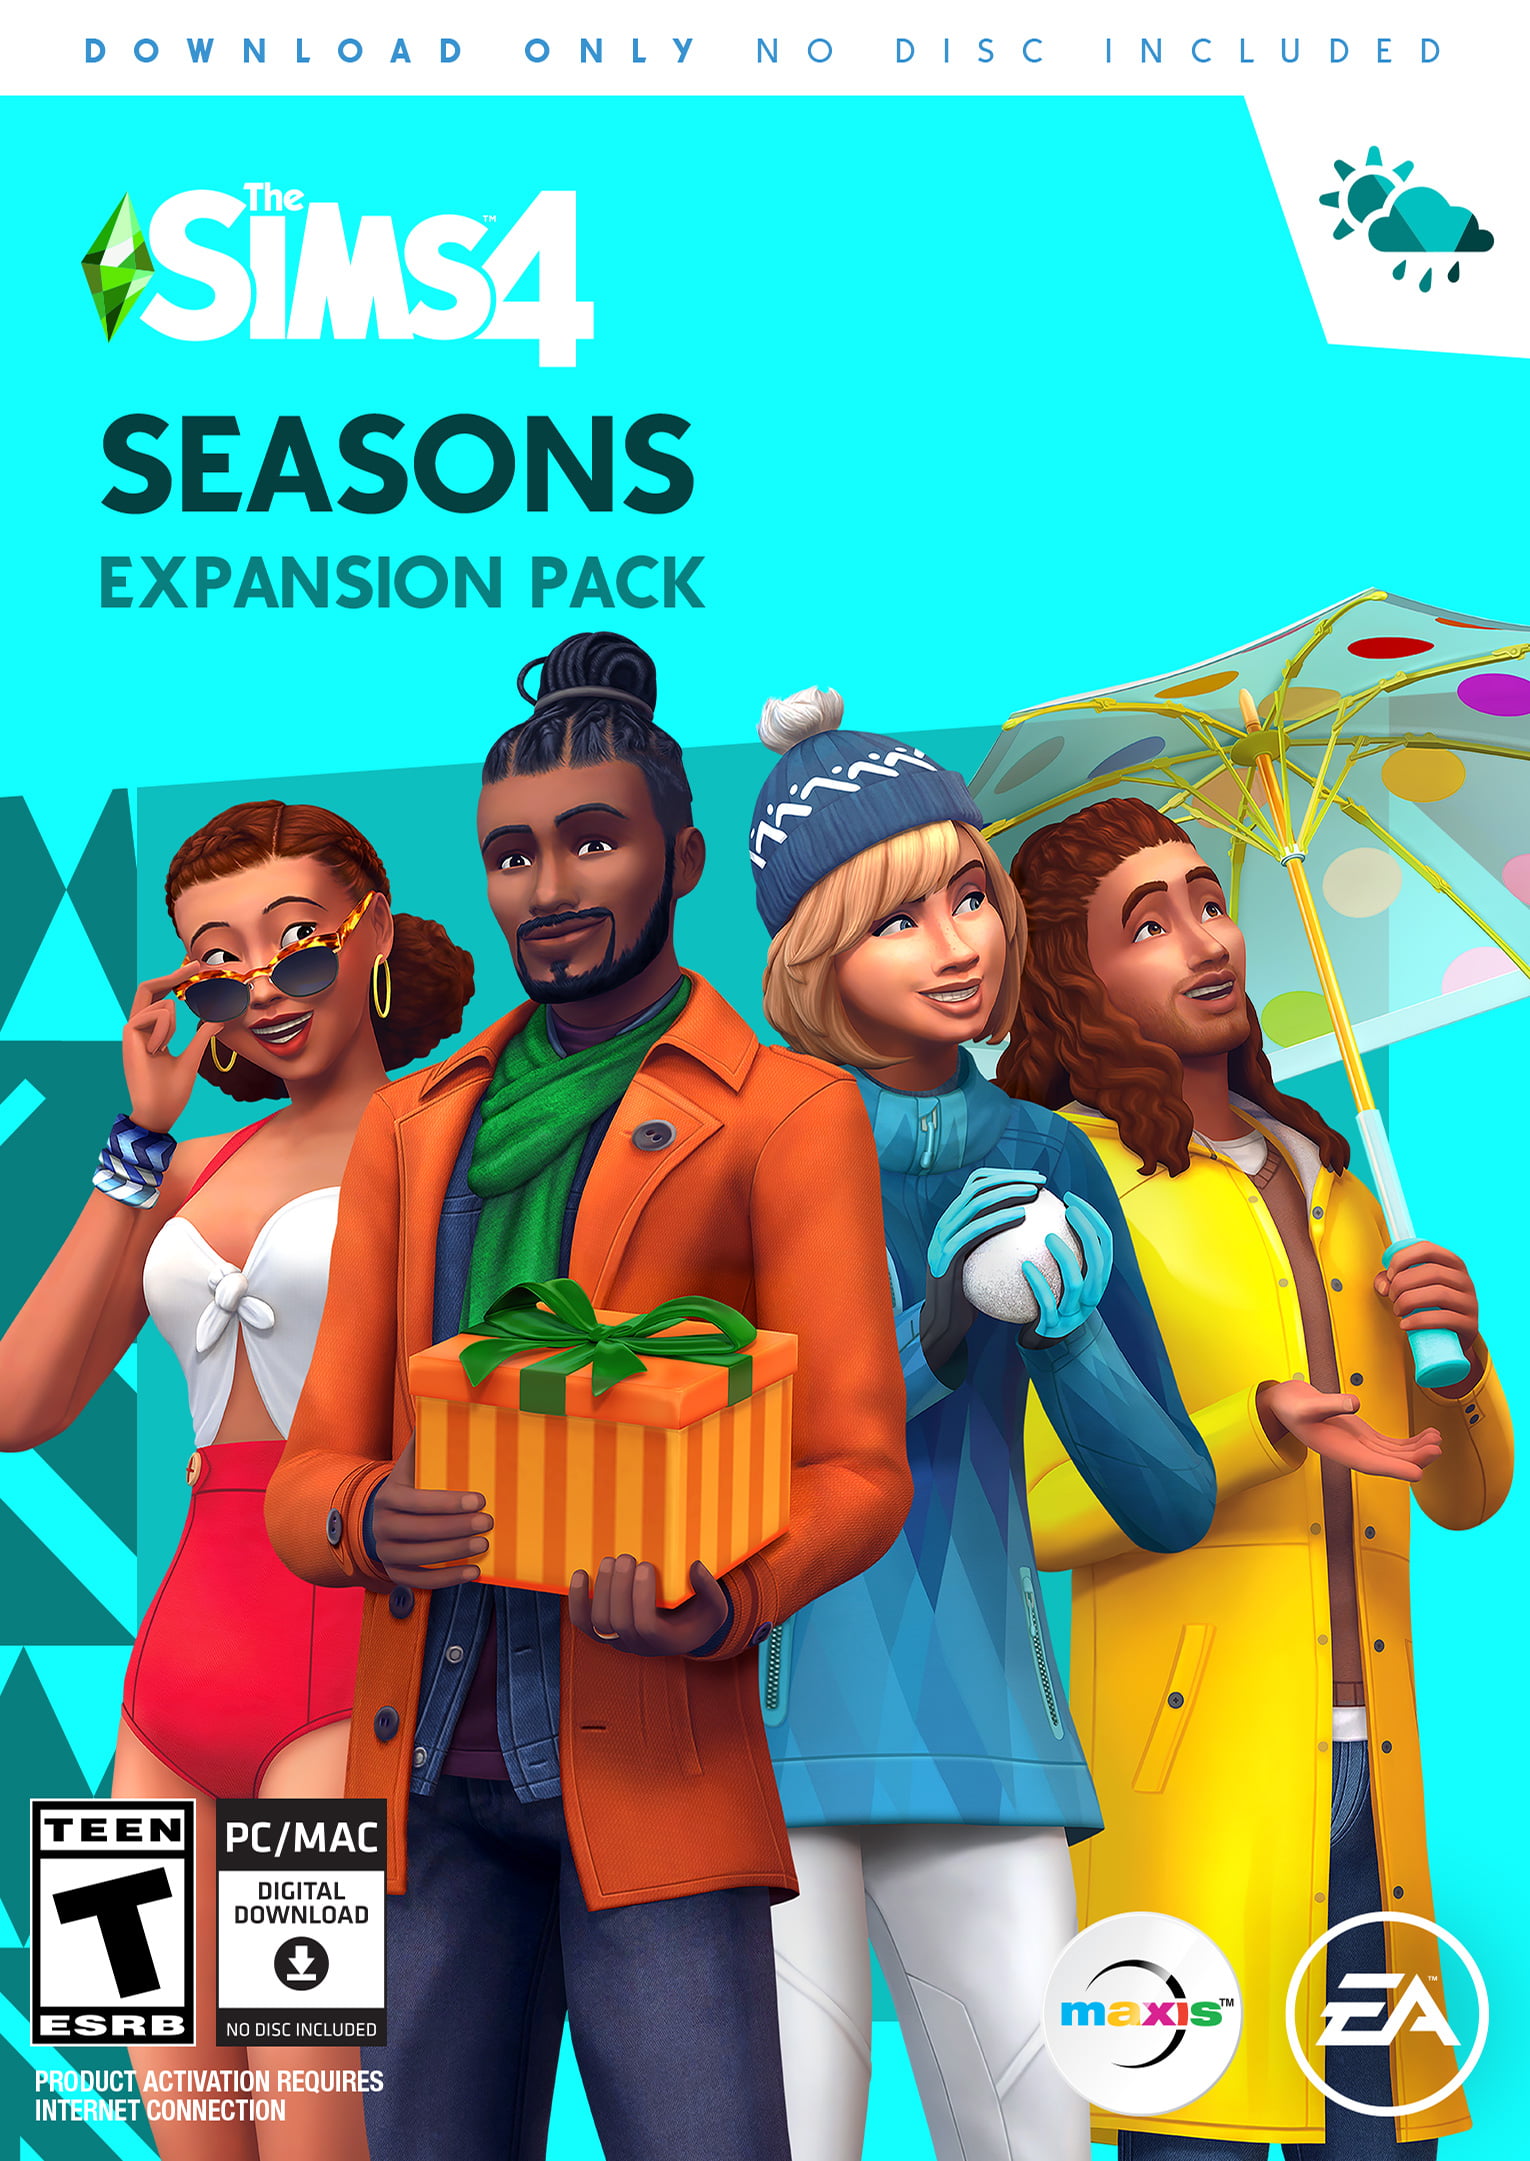 The Sims 4 Expansion Packs Free Download – Sims 4 Expansion Packs